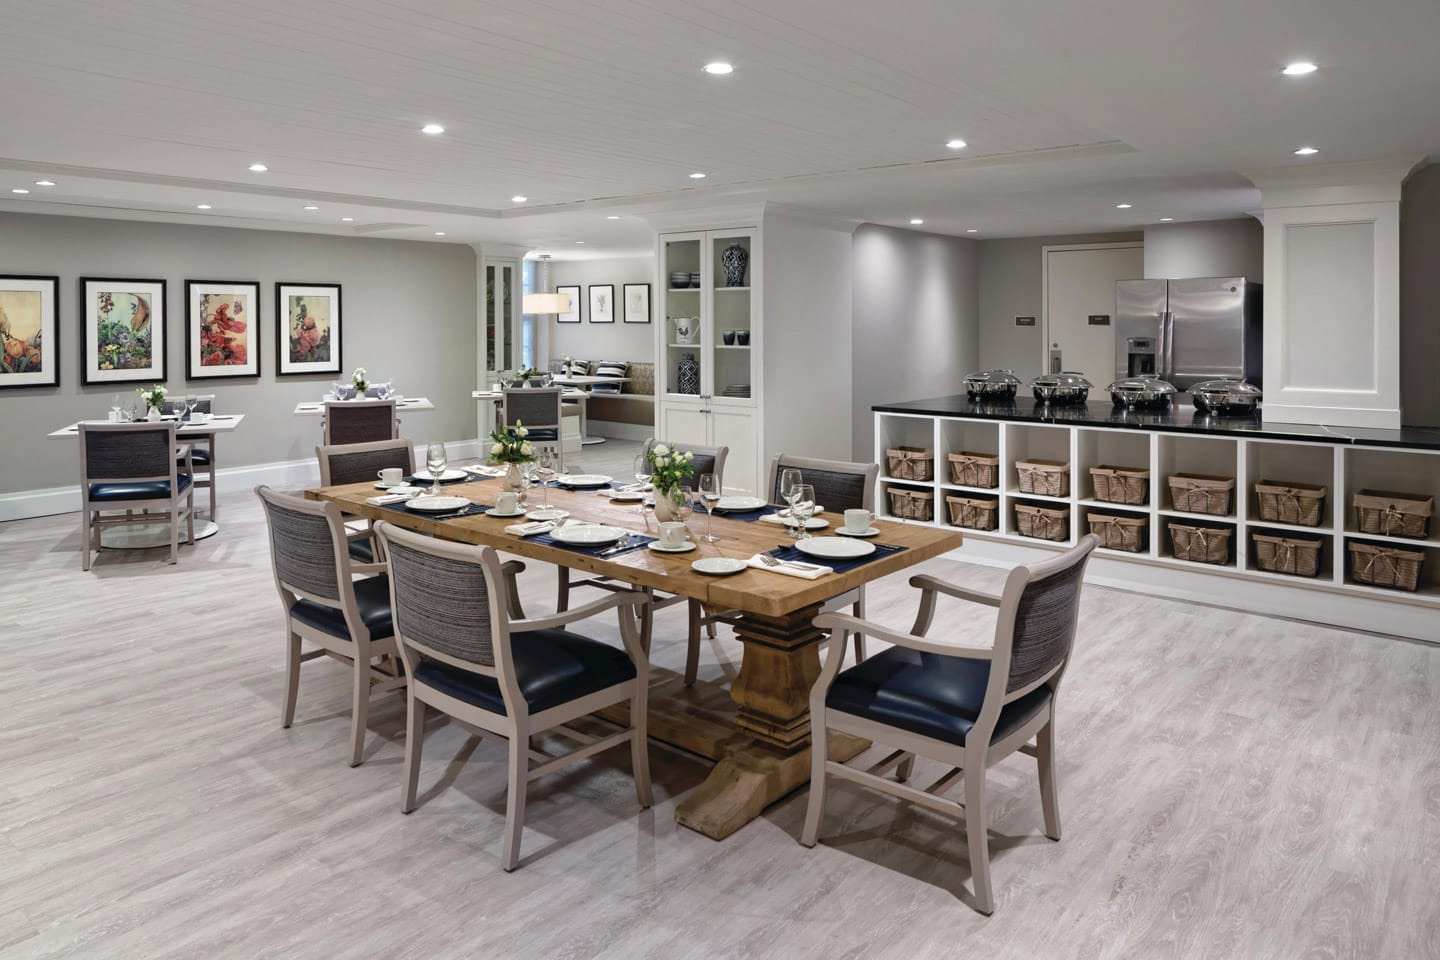 A communal dining space ideal for Memory Care residents and their loved ones to enjoy a quiet meal during visits.